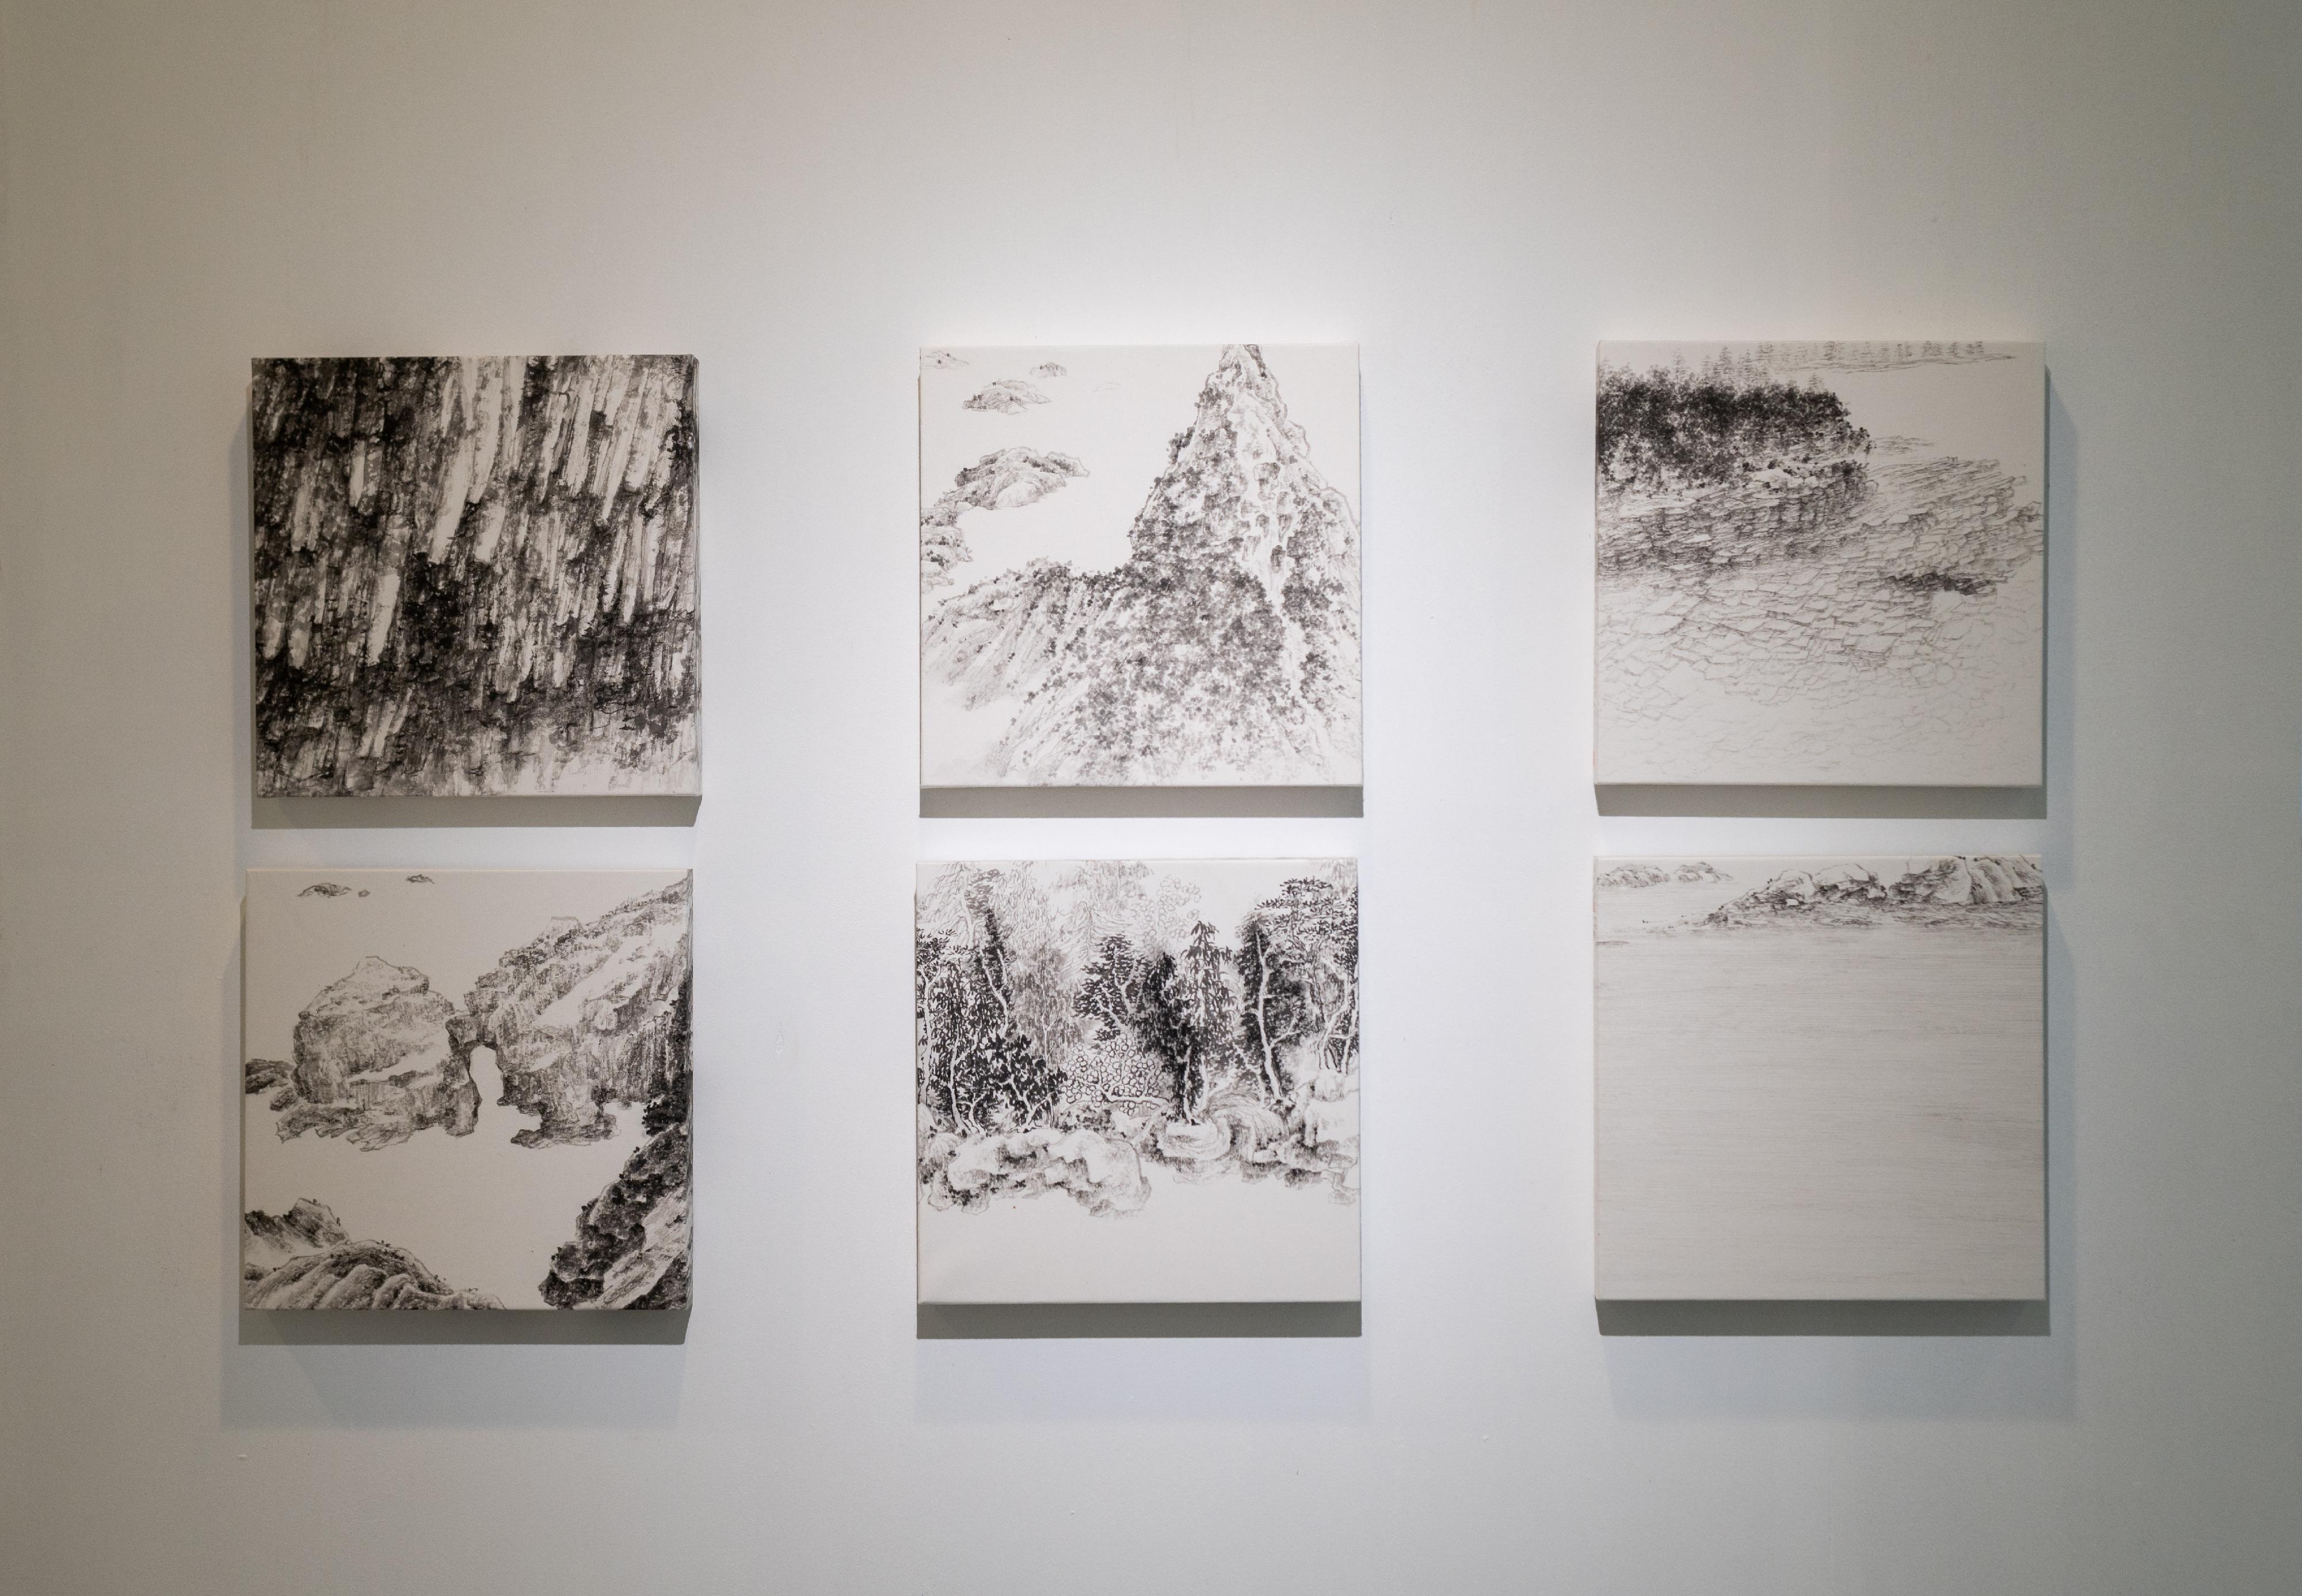 The Art Promotion Office is holding the "Art Specialist Course 2021-2022 Graduation Exhibition" from today (November 16) to showcase 19 graduates' achievements and sharing of their creative ideas. Picture shows Art Specialist Course (Chinese Art) graduate Cheung Wai-tong's artworks "Enlightening - Landscape (6 scenes)".